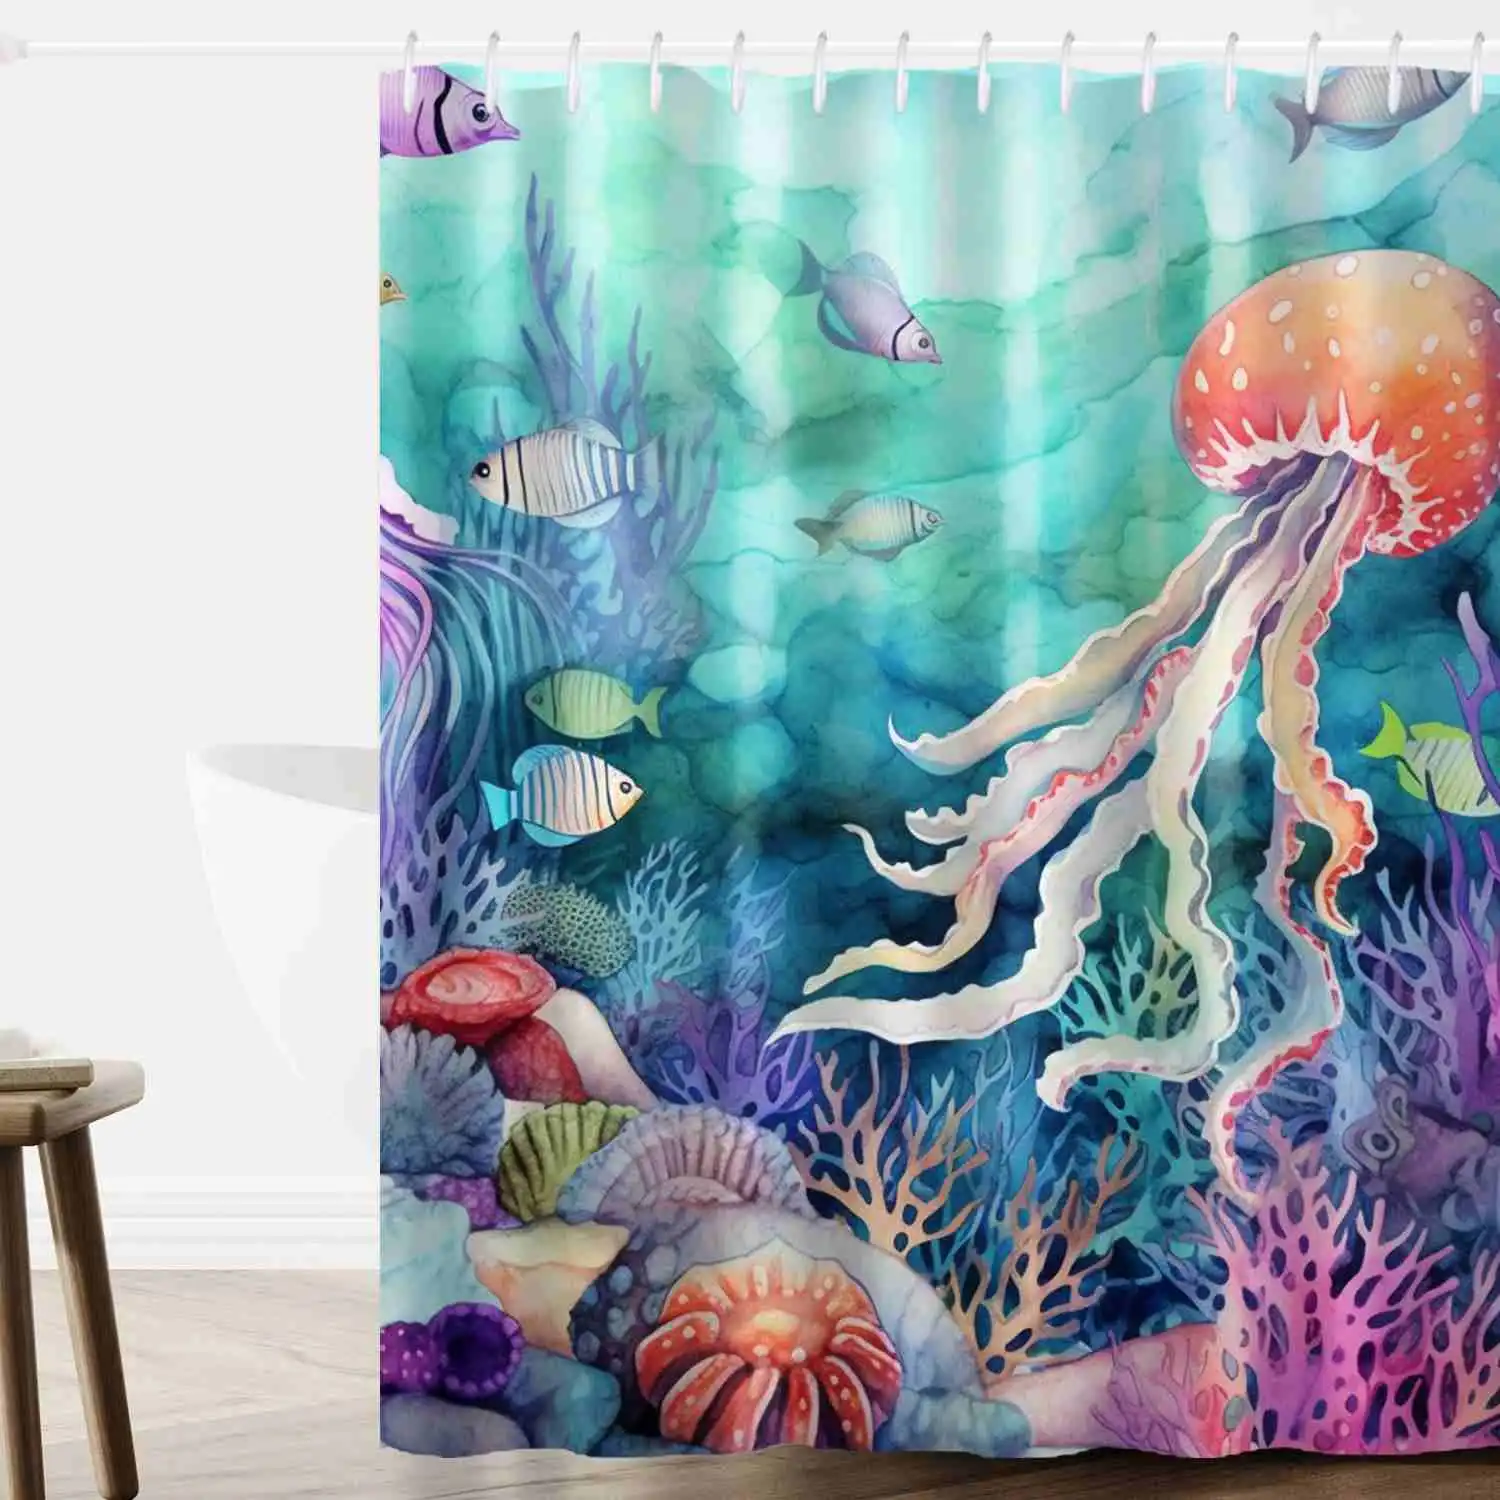 Unique Shower Curtains for Small Bathrooms: A colorful shower curtain with a jellyfish and fishes.